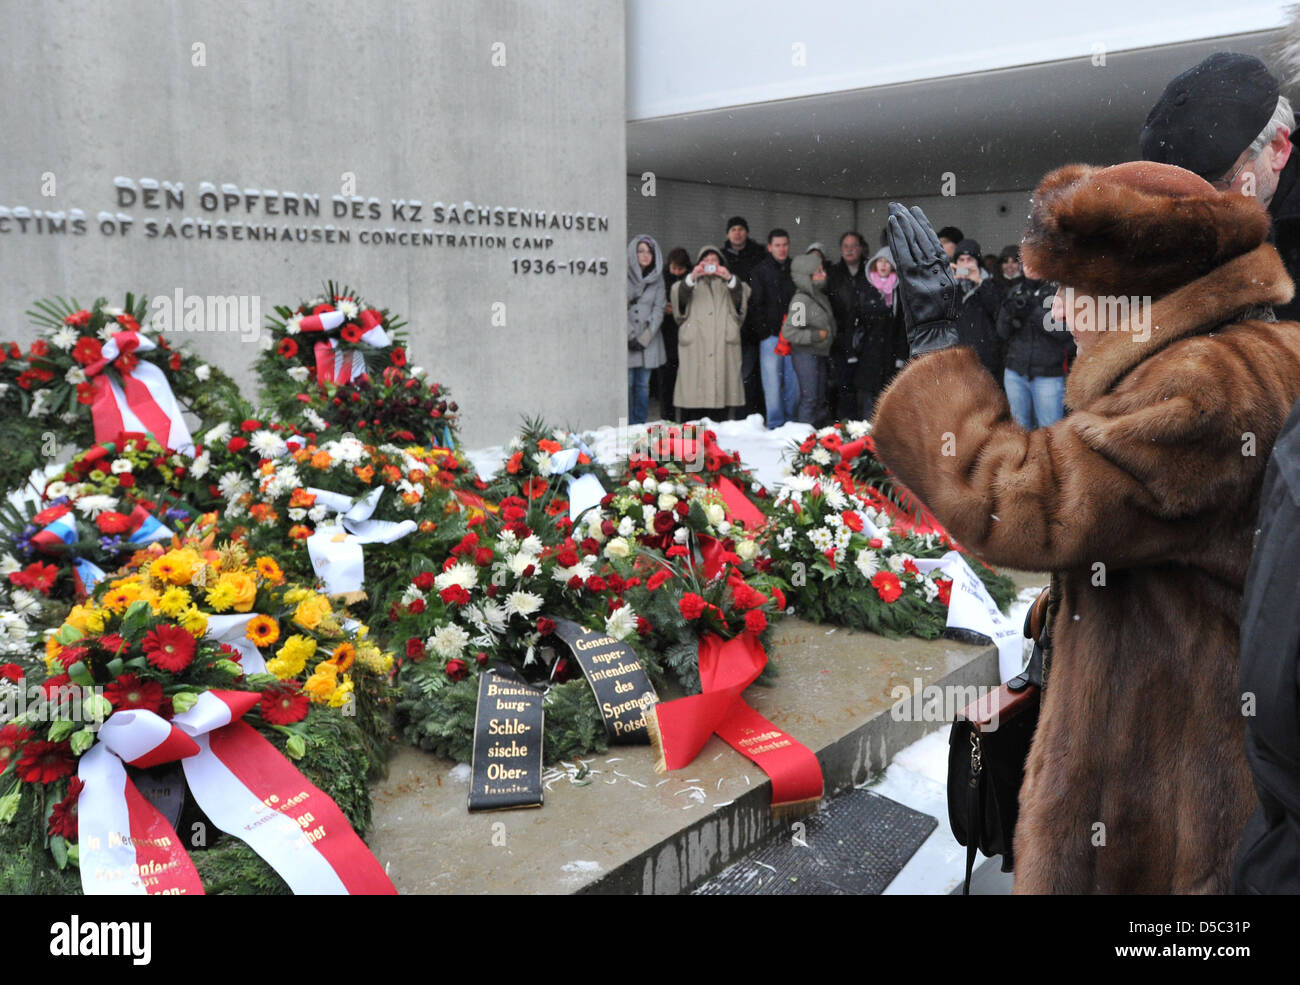 Helga Luther (R), survivor of women's concentration camp Ravensbrueck, attends the mourning ceremony in front of wreaths at the former Sachsenhausen concentration camp in Oranienburg, Germany, 27 January 2010. Numerous events remember the victims of the Nazi regime ion the International Holocaust Memorial Day. On 27 January 1945, the Soviet army liberated the concentration camp Aus Stock Photo